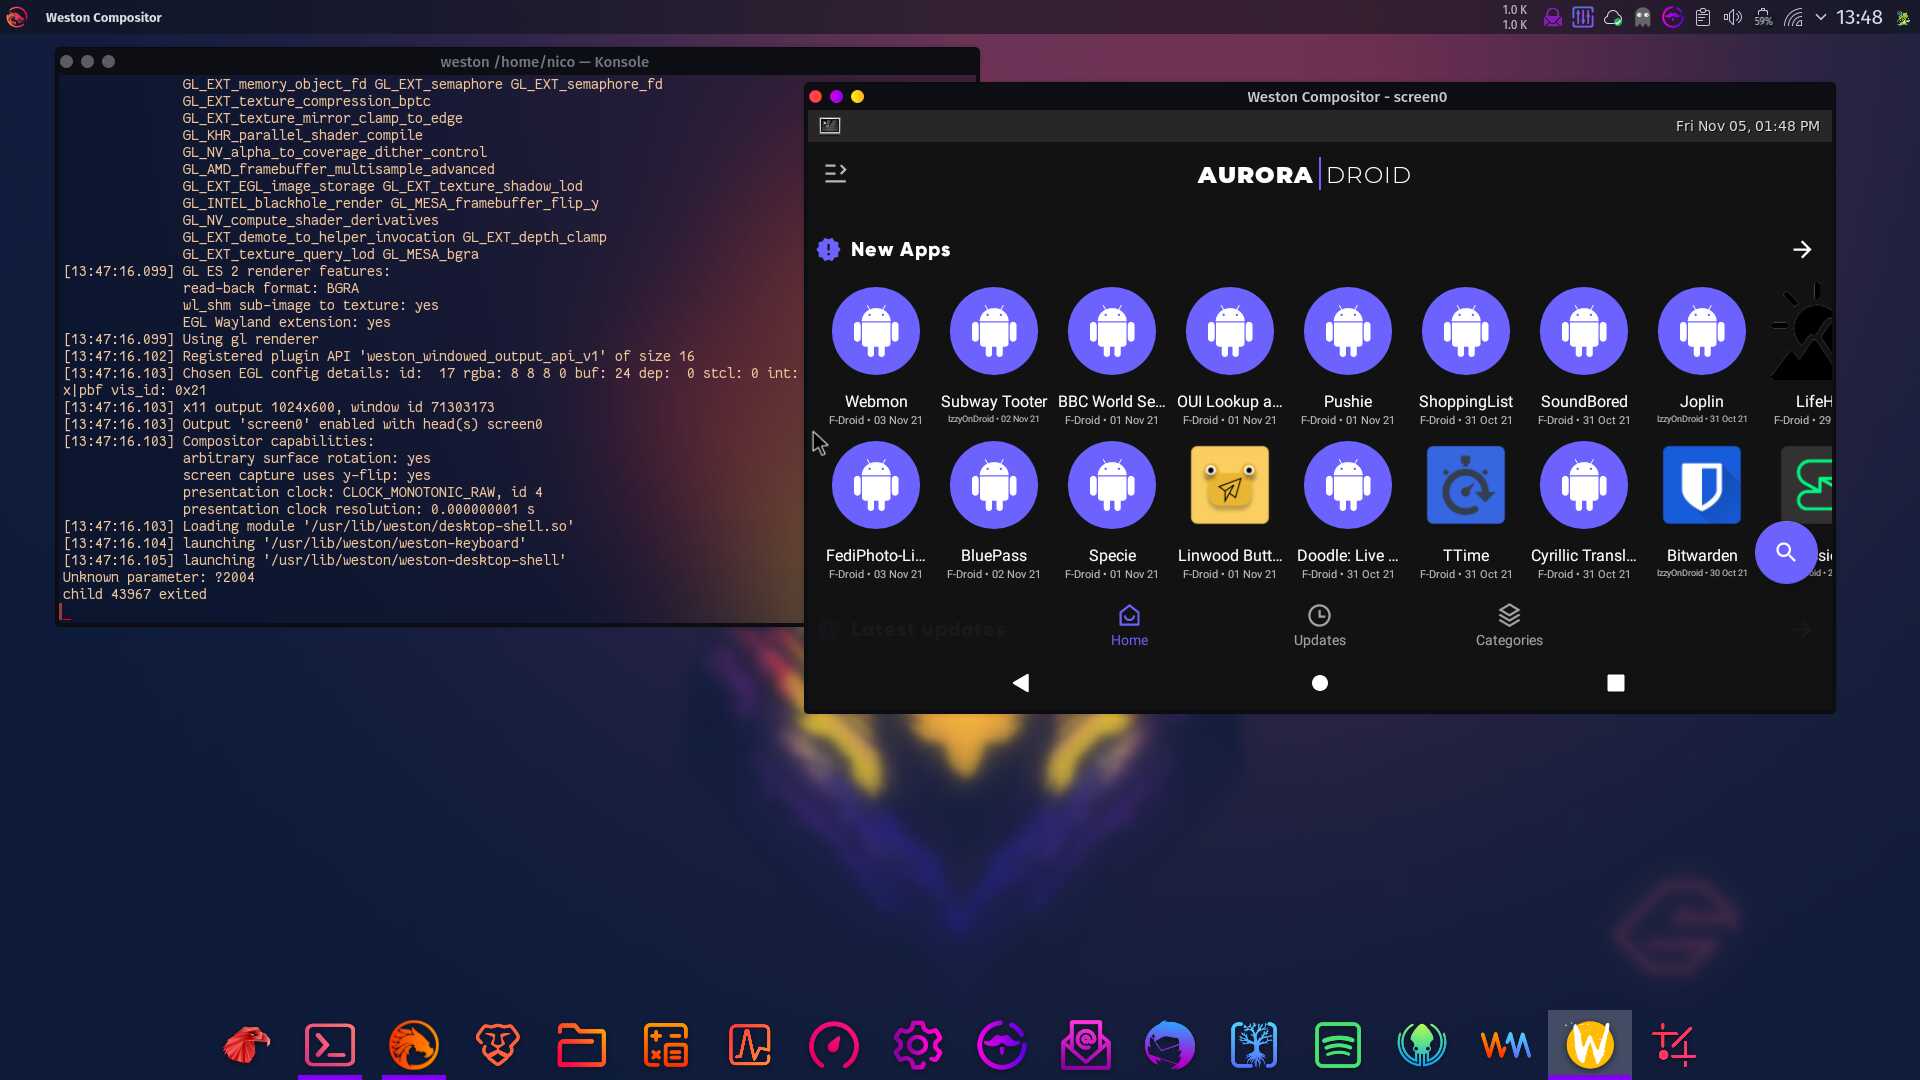 How to Run Android Apps on Linux Distros (like Ubuntu) - Hongkiat